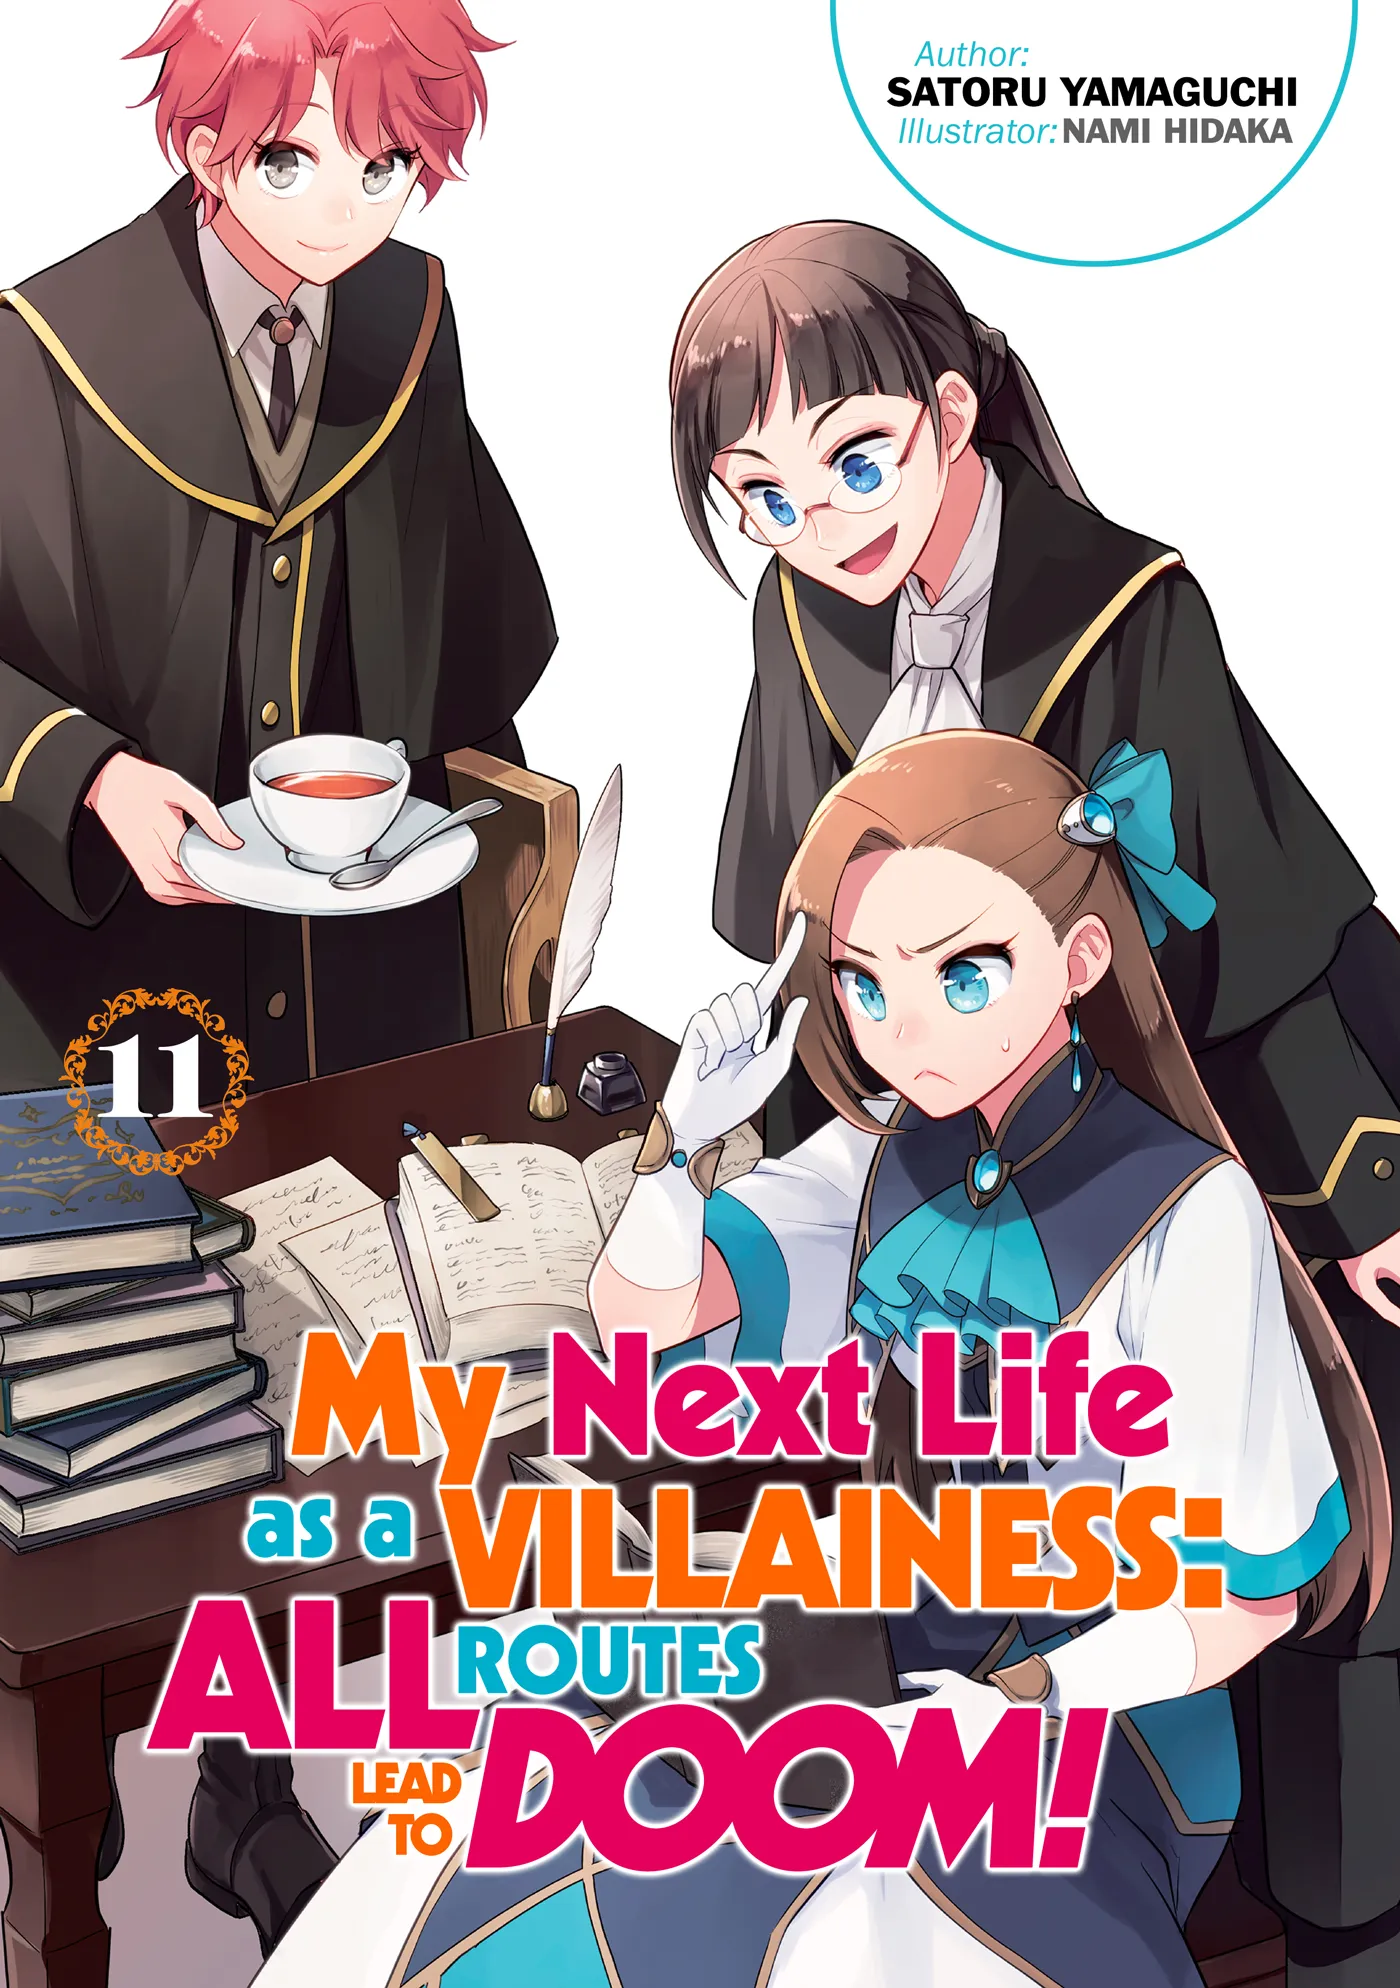 My Next Life as a Villainess: All Routes Lead to Doom! Volume 11 (My Next Life as a Villainess: All Routes Lead to Doom! #11)